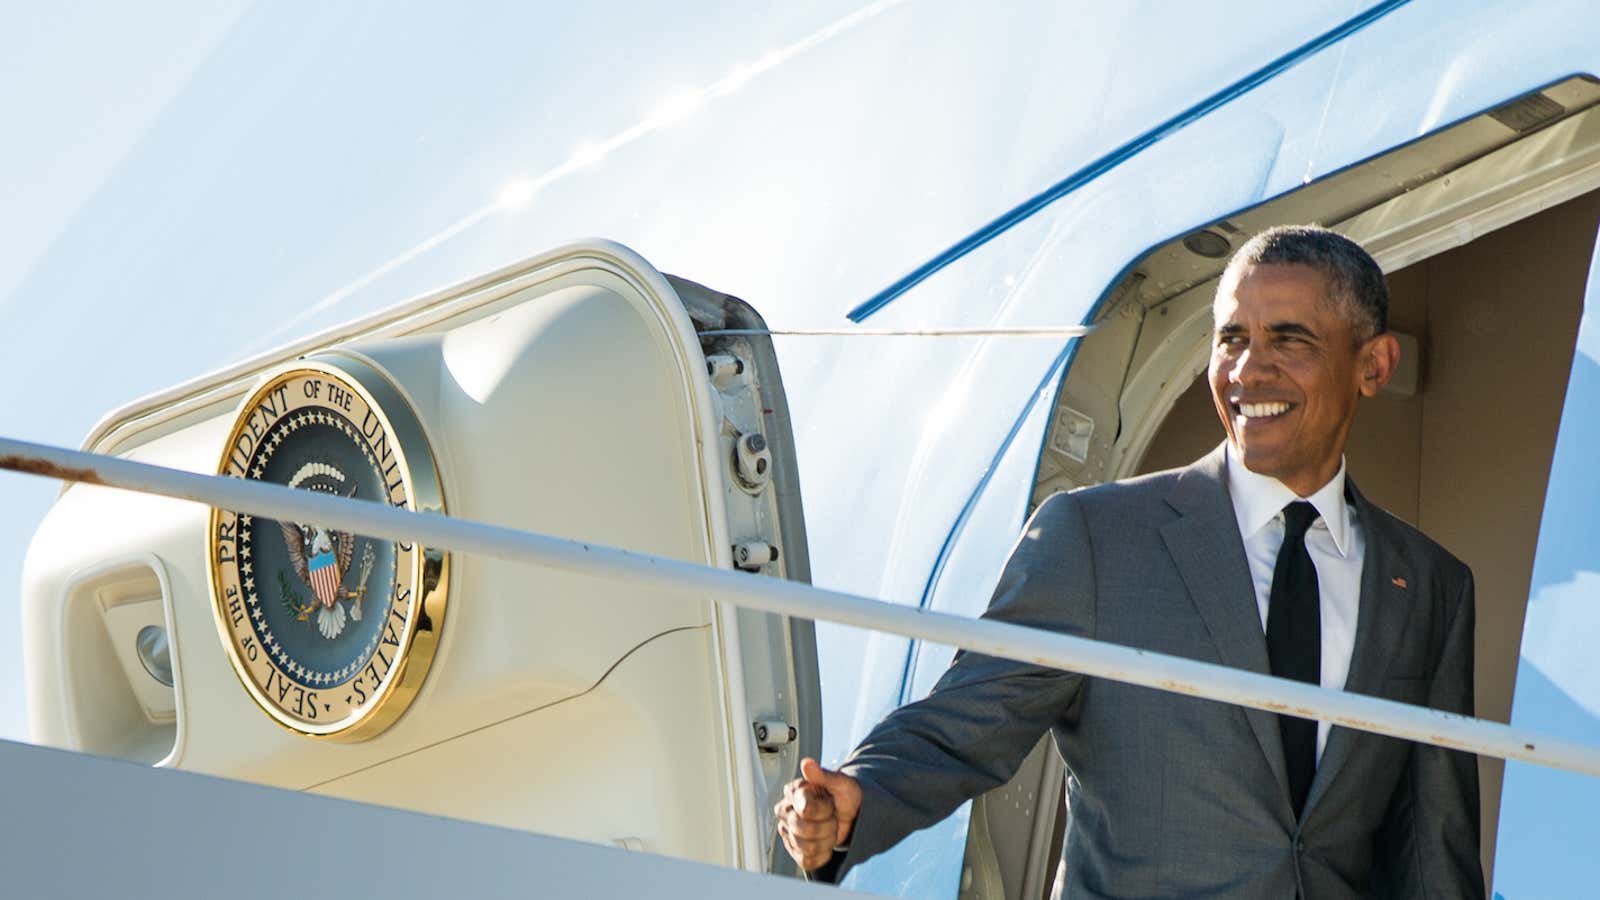 President Barack Obama boards Air Force One at Louis Armstrong International Airport in New Orleans, Thursday, Aug. 27, 2015, to travel to Andrews Air Force Base, Md. Obama was visiting New Orleans for the 10th anniversary since the devastation of Hurricane Katrina. (AP Photo/Andrew Harnik)